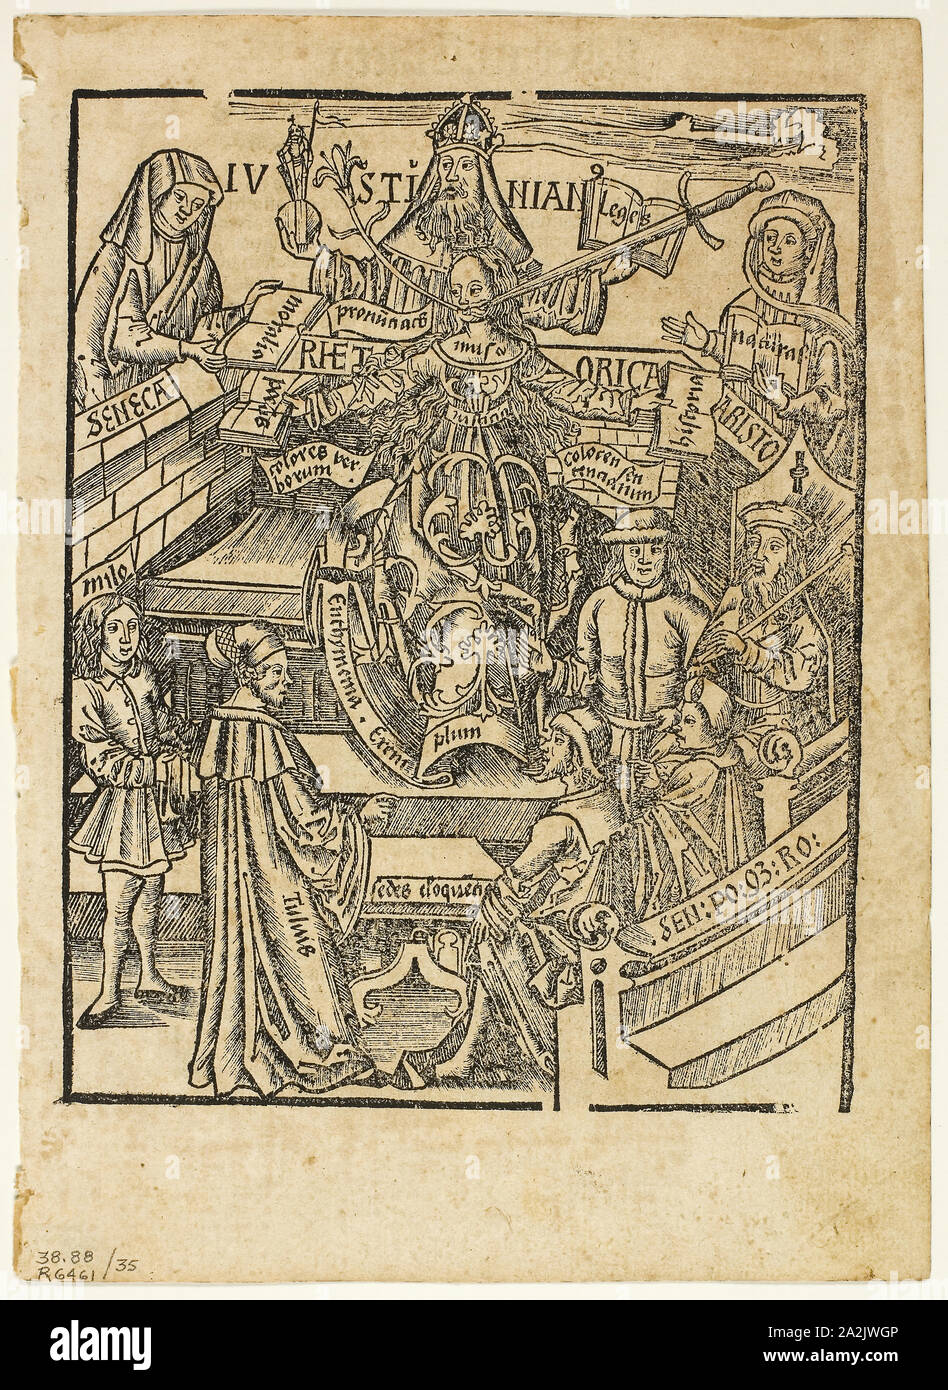 Illustration from Margarita philosophica, plate 35 from Woodcuts from Books of the XVI Century, 1517, assembled into portfolio 1937, Unknown Artist (German, 16th century), assembled by Max Geisberg (Swiss, 1875-1943), Germany, Woodcut on paper, 158 × 124 mm (image), 197 × 143 mm (sheet Stock Photo